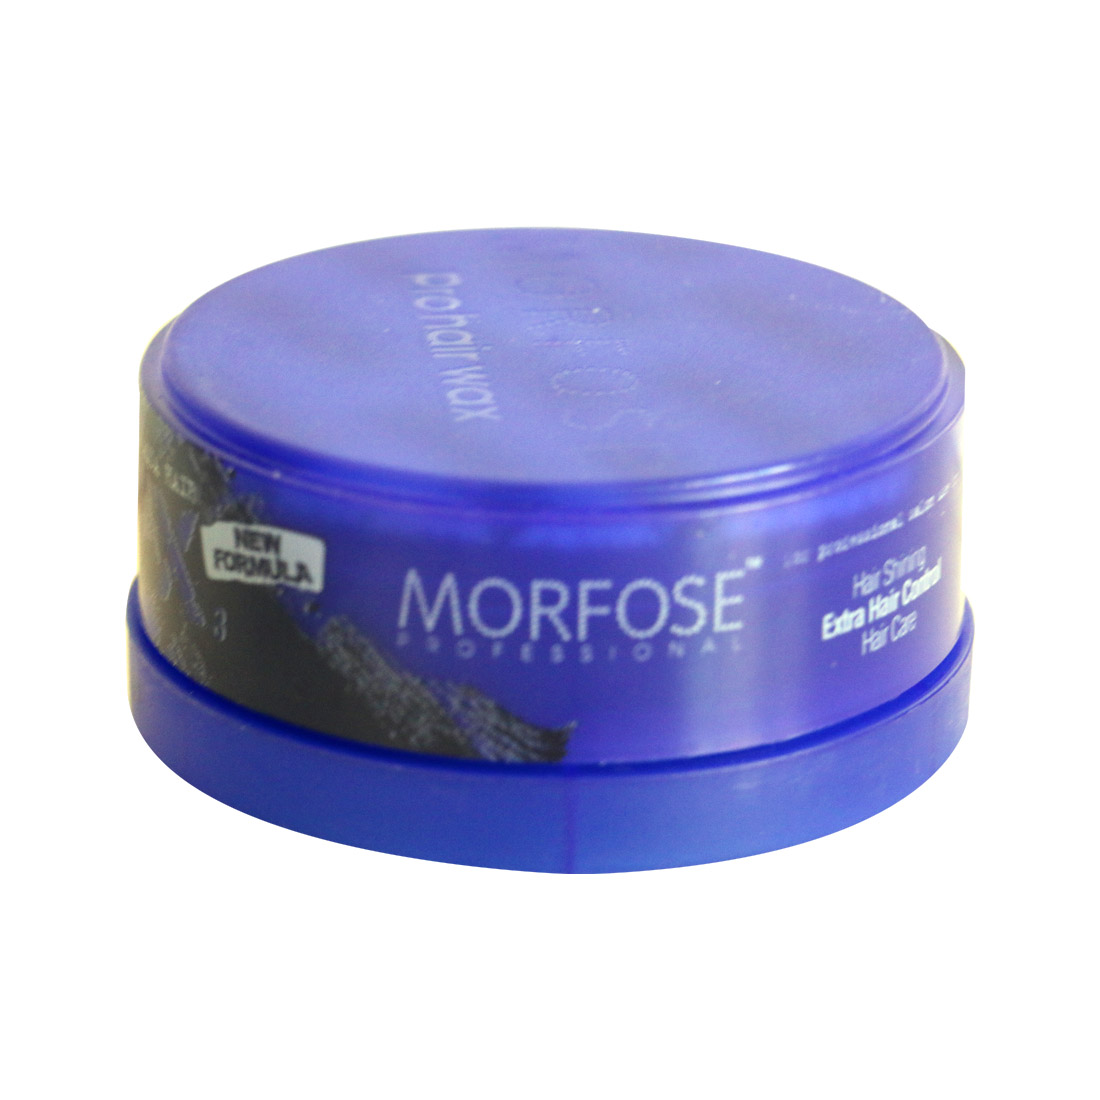 MORFOSE HAIR STYLING WAX 150ML(BLUE JAR) - Welcome To Shaversfactory- Home  of affordable barber supplies and barber tools- andis wahl oster babyliss  remington